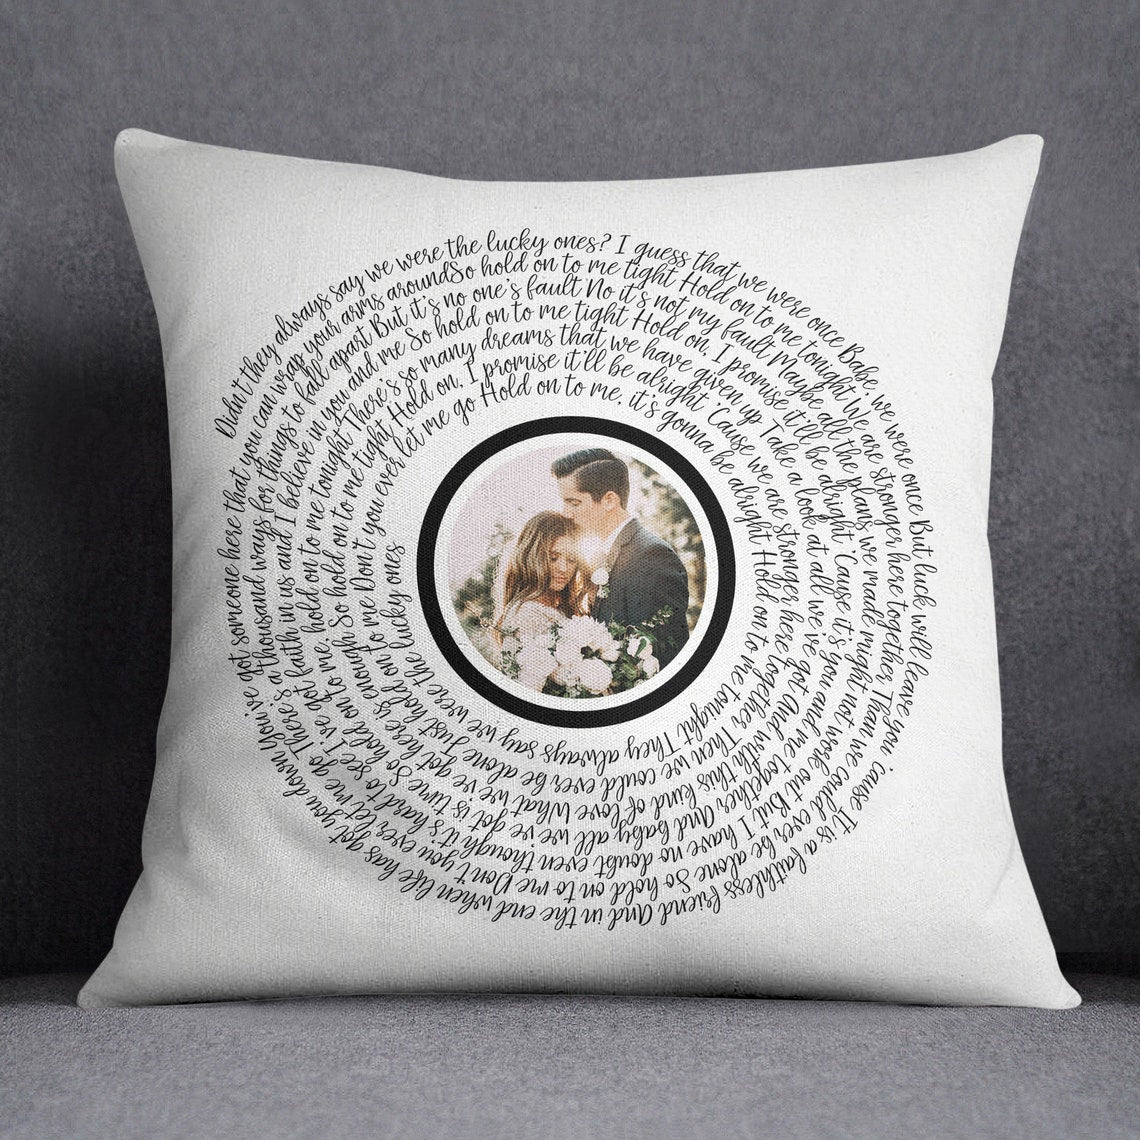 Personalized Satin Pillow for Brother: Gift/Send Home Gifts Online  J11114582 |IGP.com